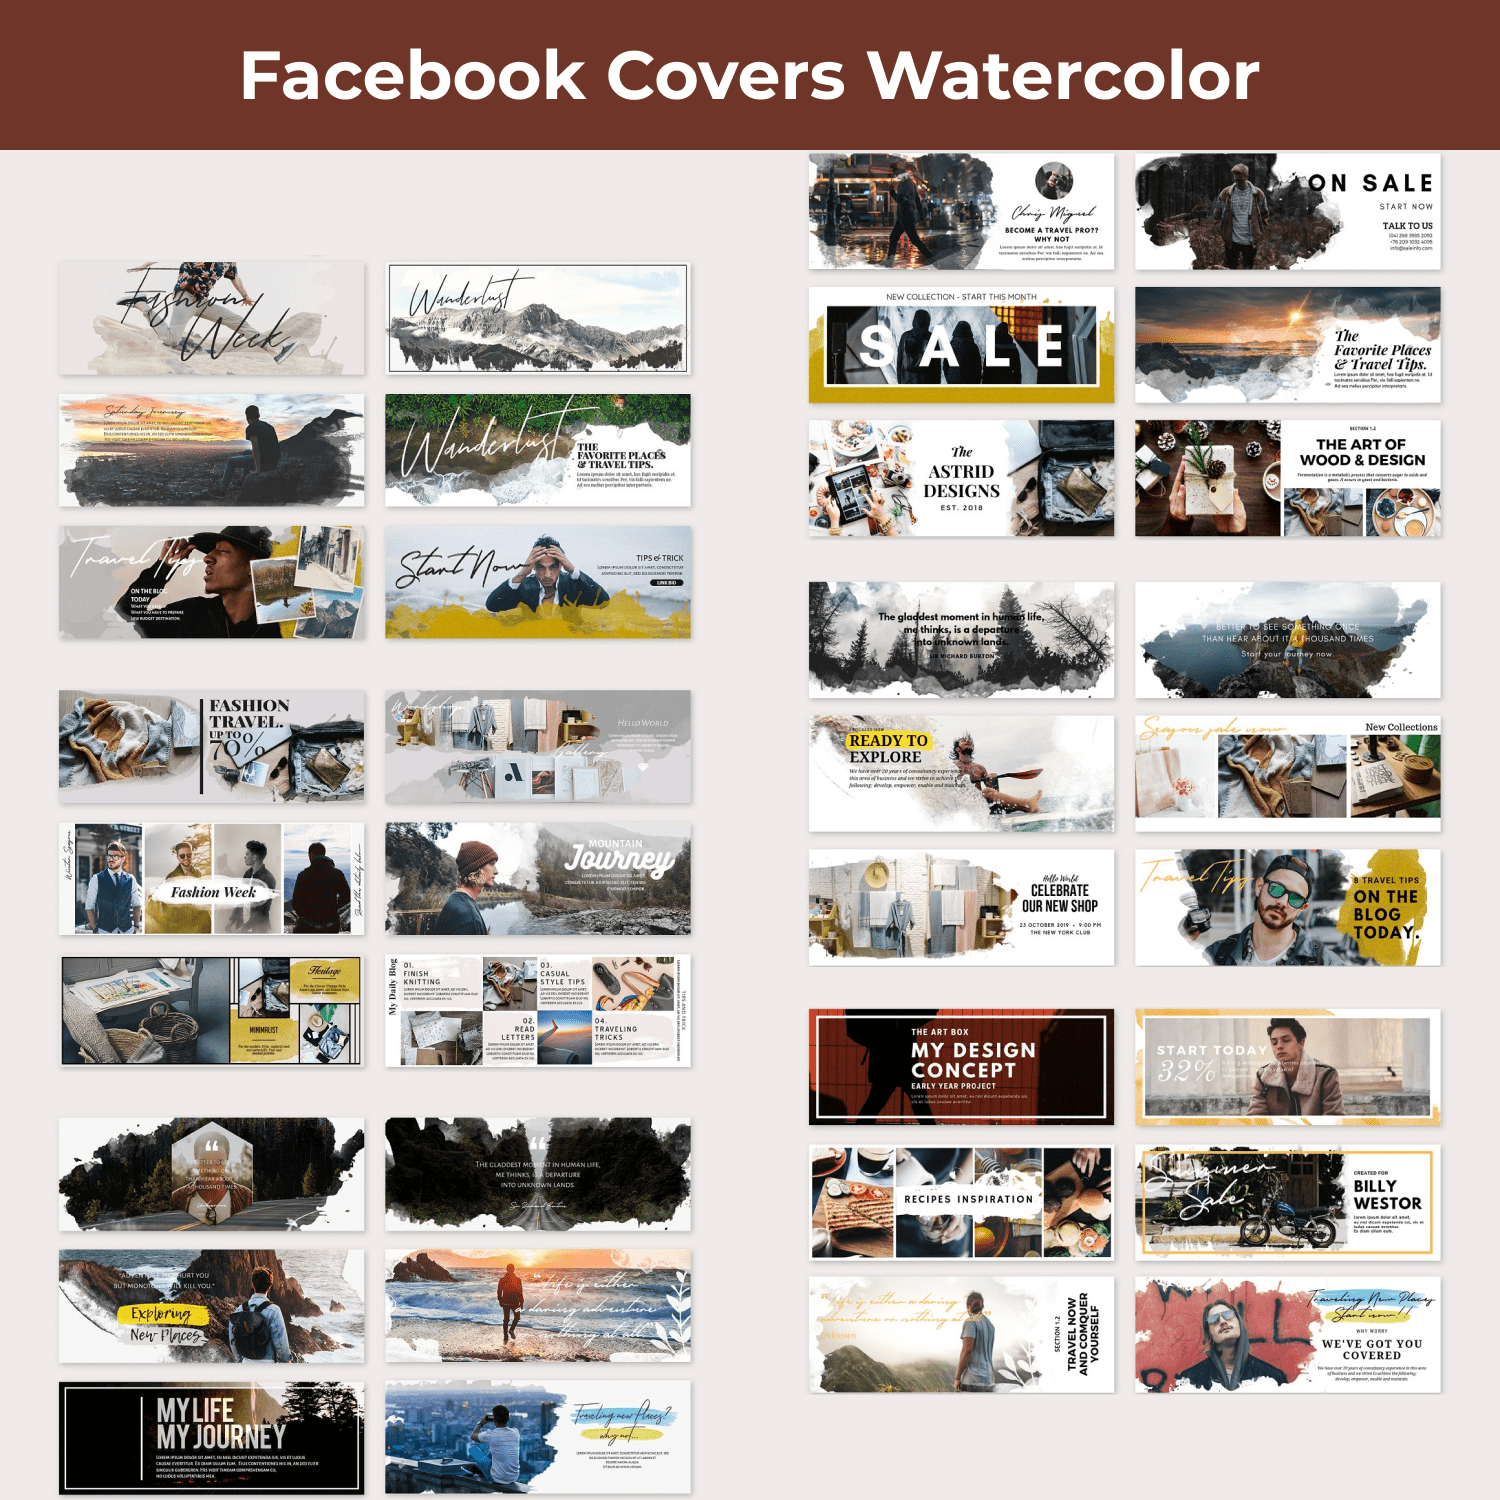 Facebook Covers Watercolor main cover.